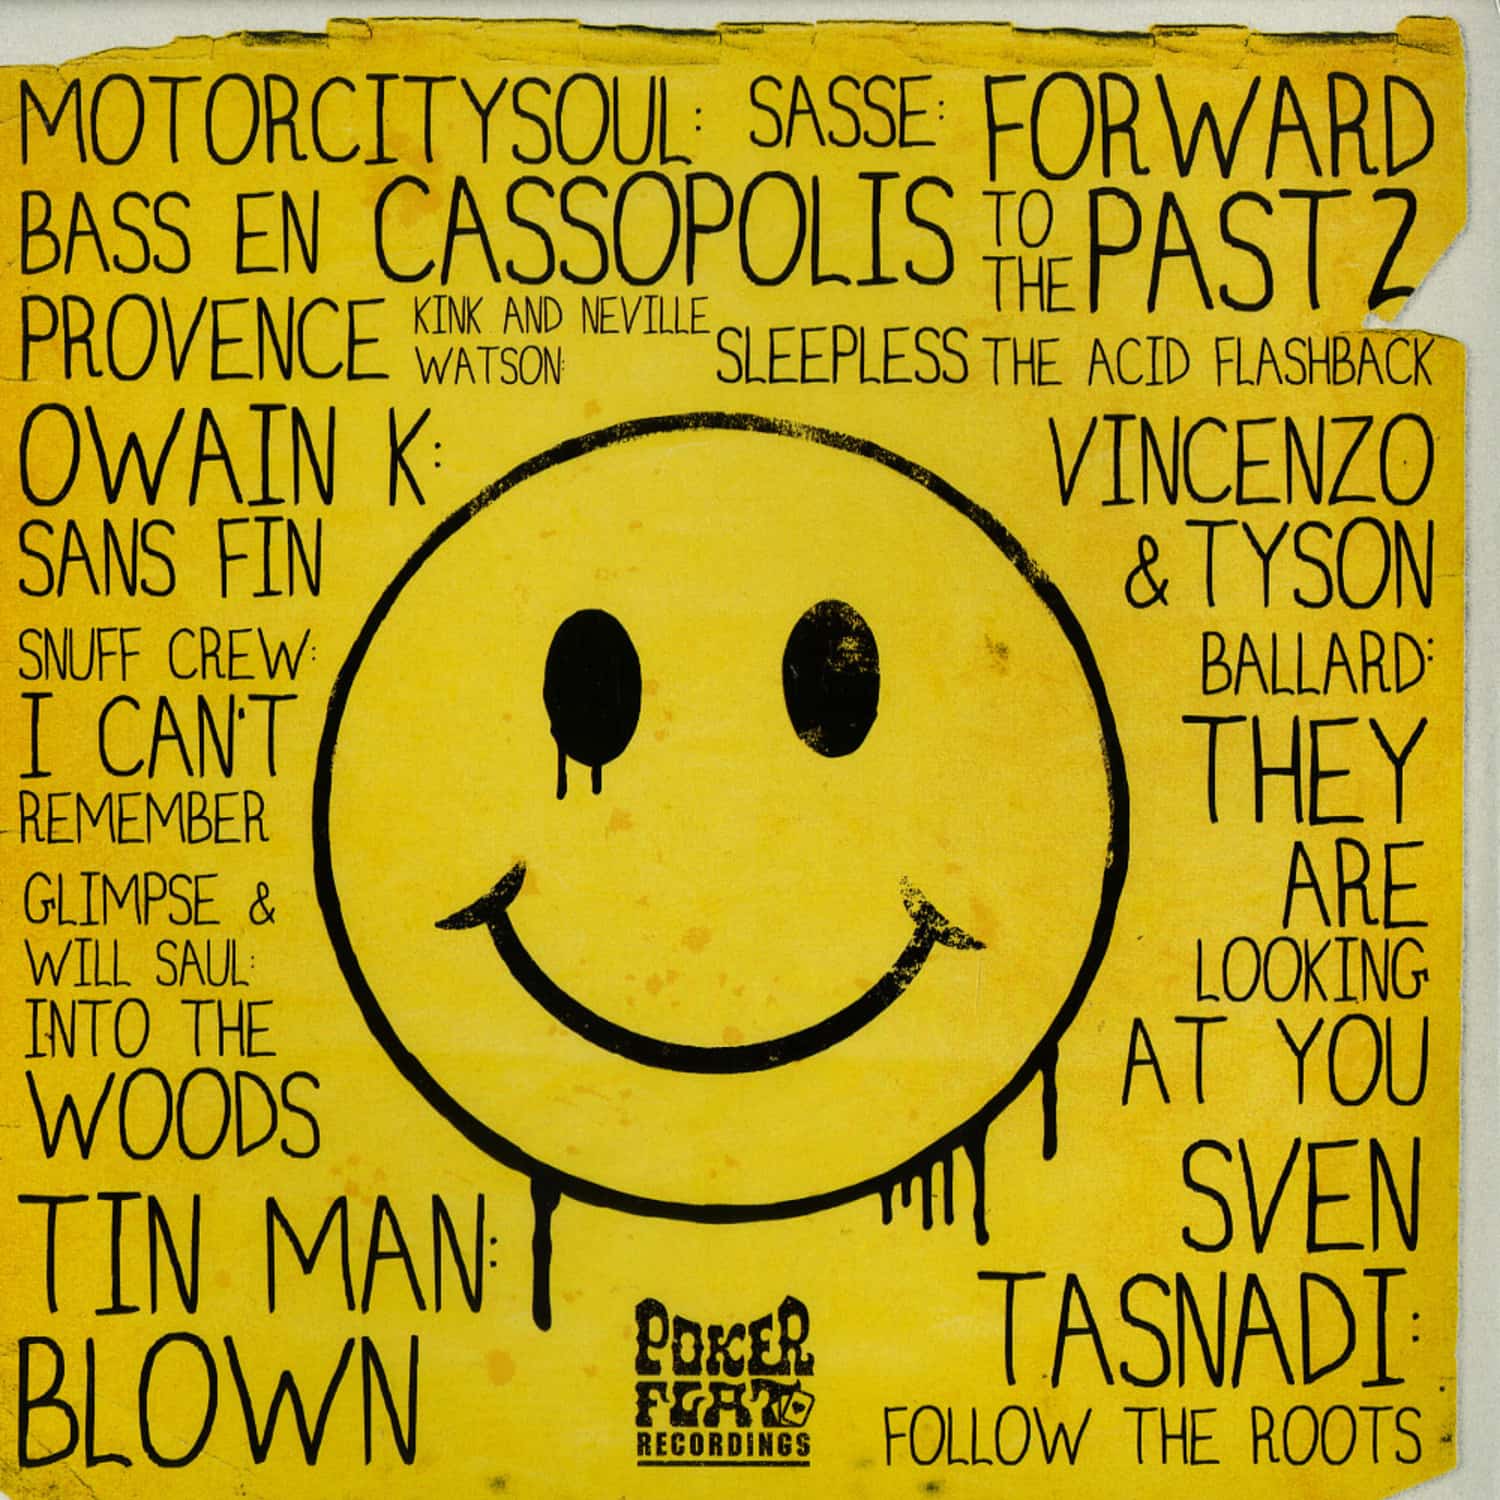 Various Artists - FORWARD TO THE PAST 2 THE ACID FLASHBACK 